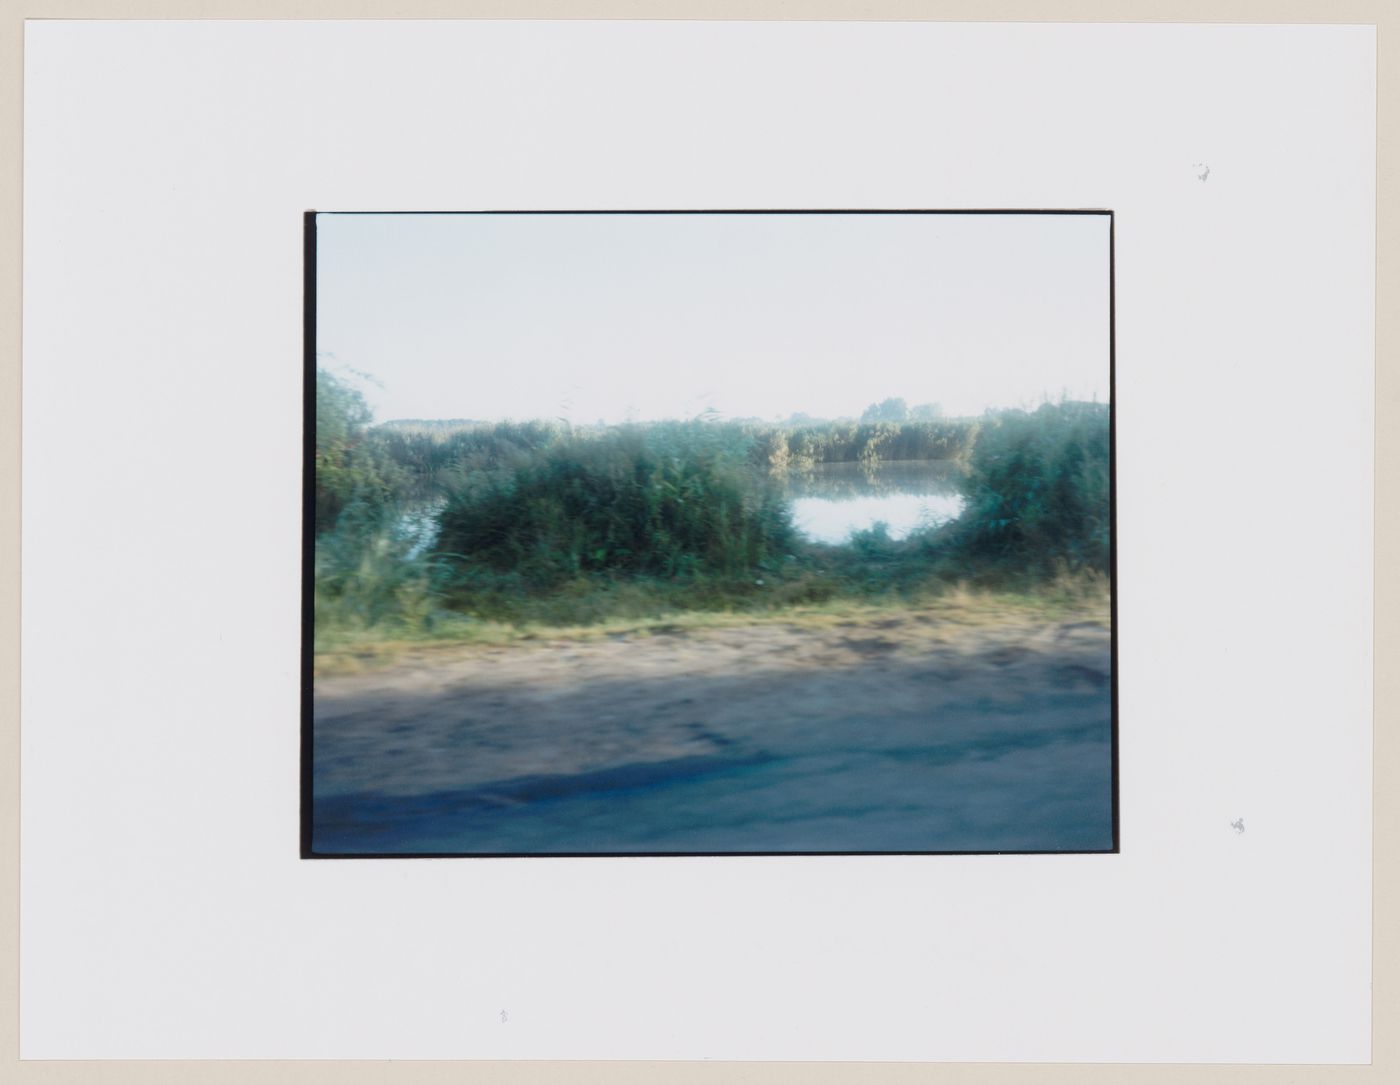 View of a lake, trees and vegetation, Dobiegniew, Poland (from the series "In between cities")